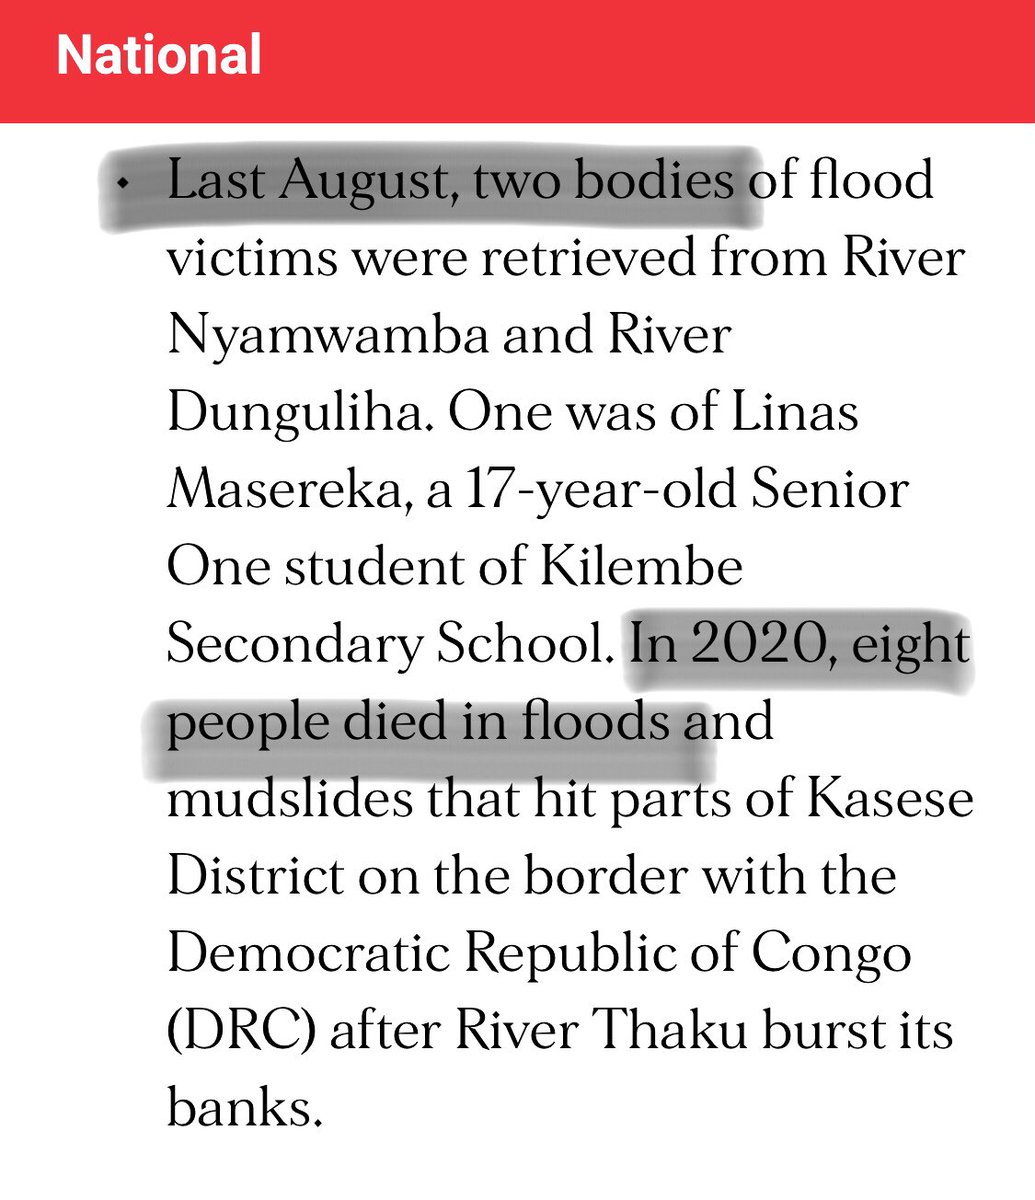 Regrettably, these horrible disasters have become annual occurrences- very predictable. Our thoughts, sympathy and prayers go to the affected families and communities in Uganda’s mountainous regions. Thanks @UgandaRedCross for the rescue efforts.